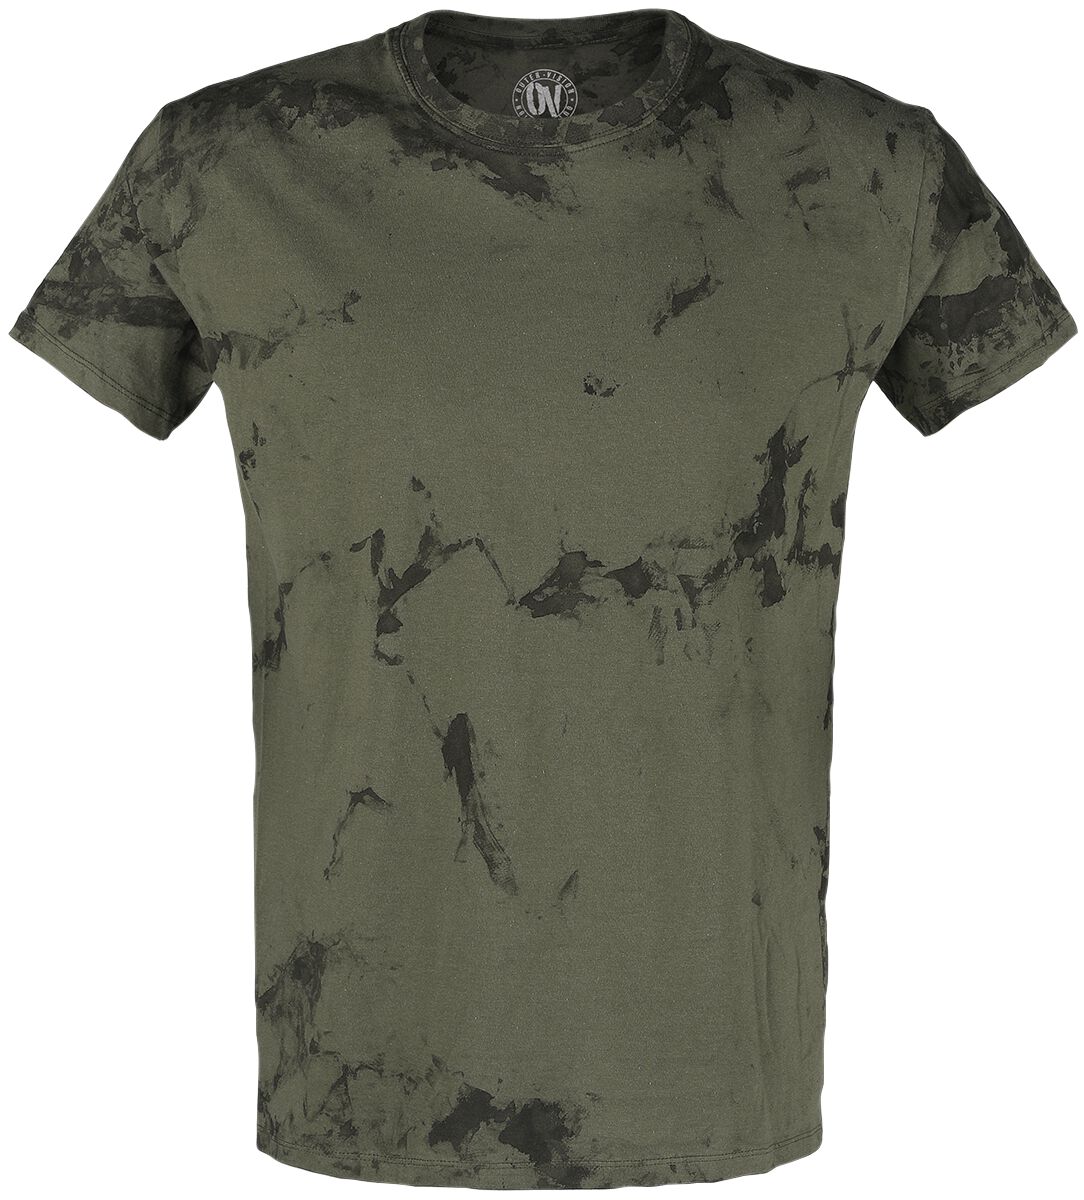 Outer Vision Man's T-Shirt T-Shirt khaki in M von Outer Vision